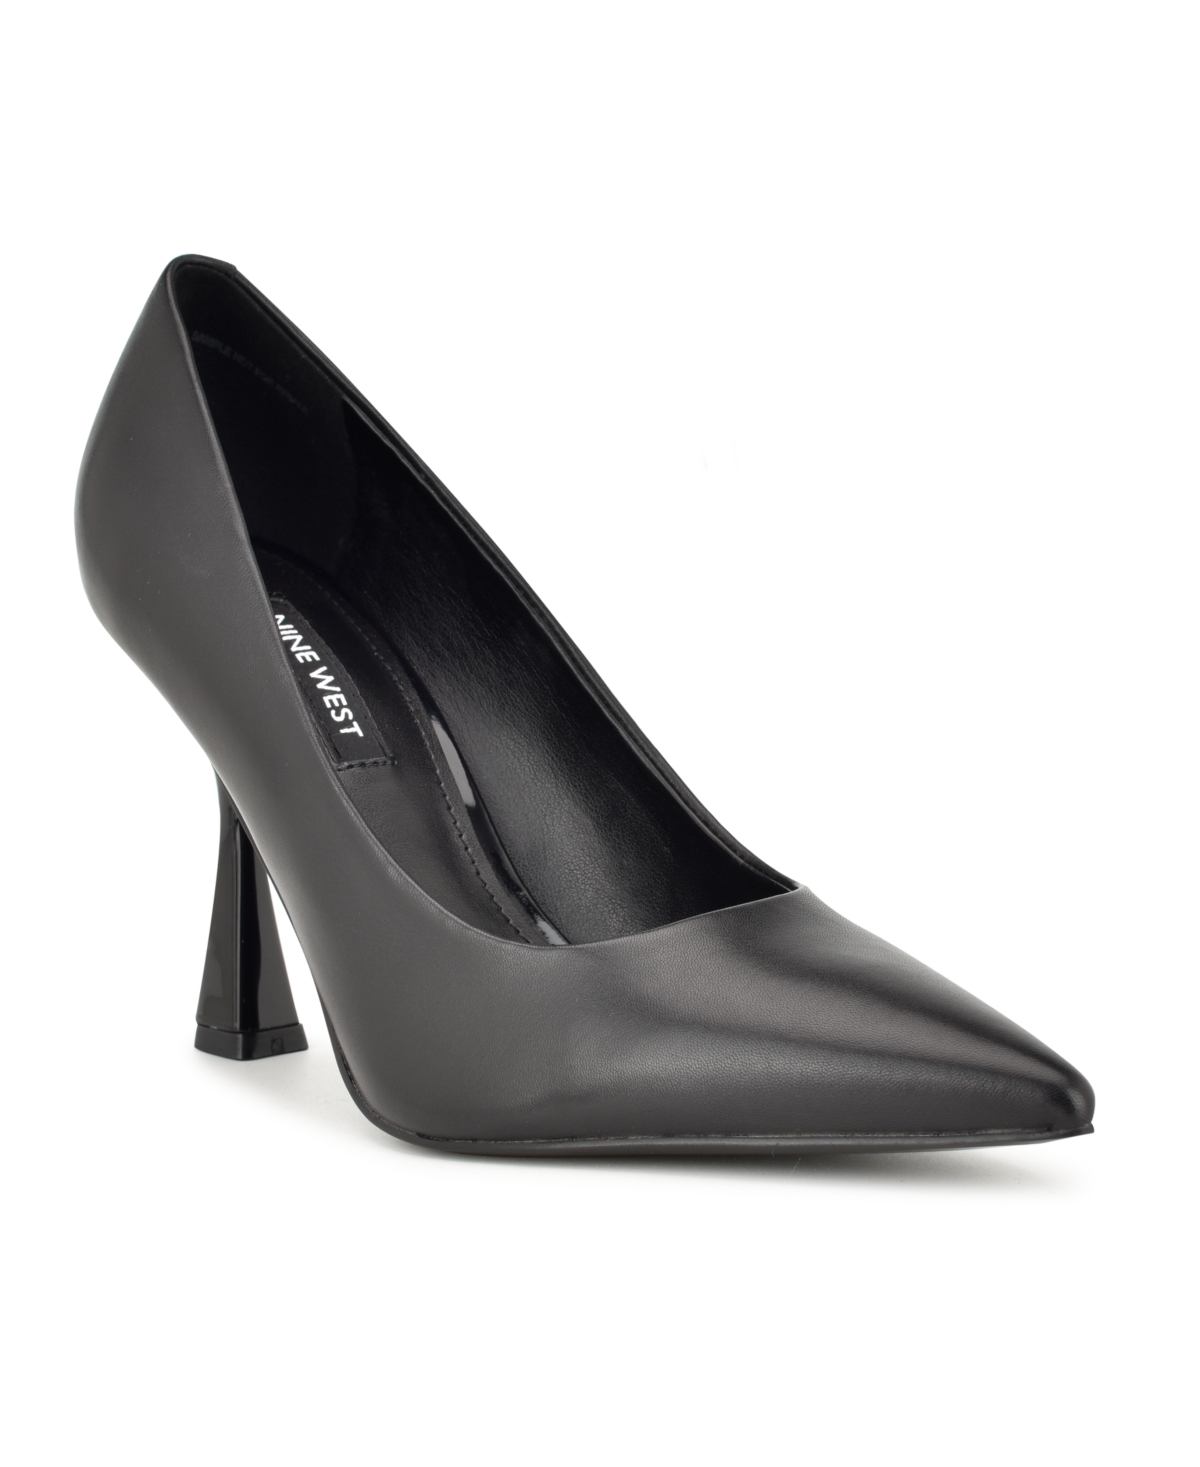 Women's Ravens Pointy Toe Tapered Heel Dress Pumps - Black Leather